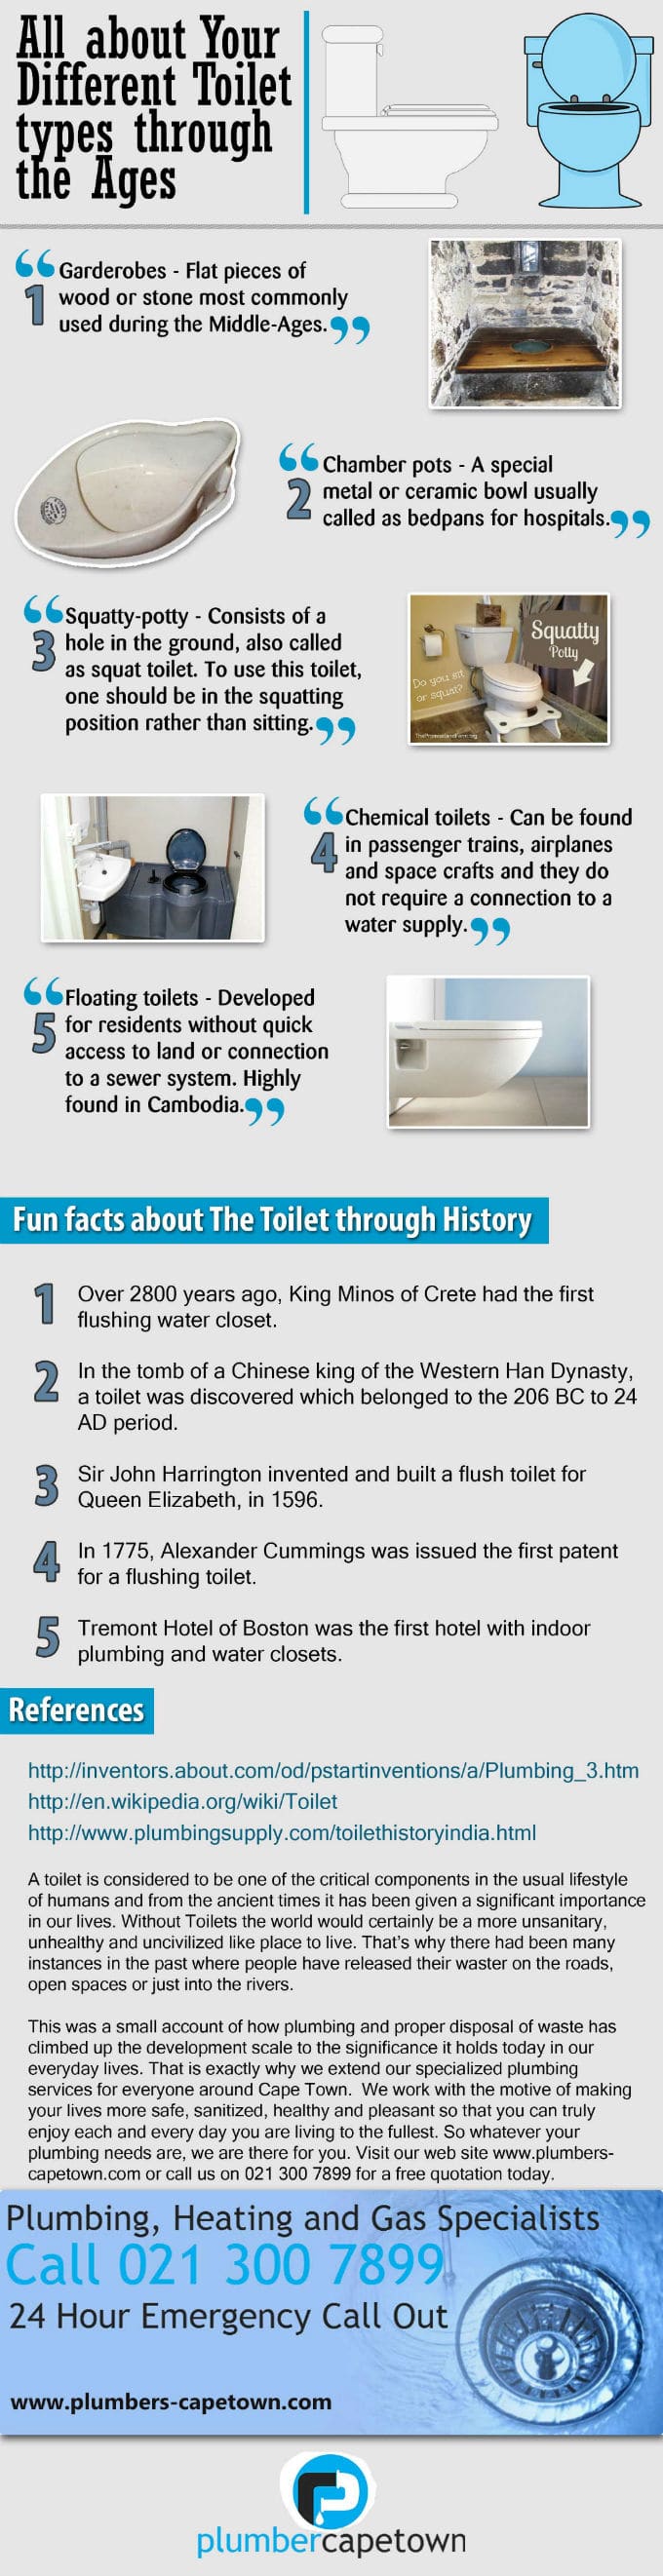 Different toilets through the ages - Plumbers Cape town